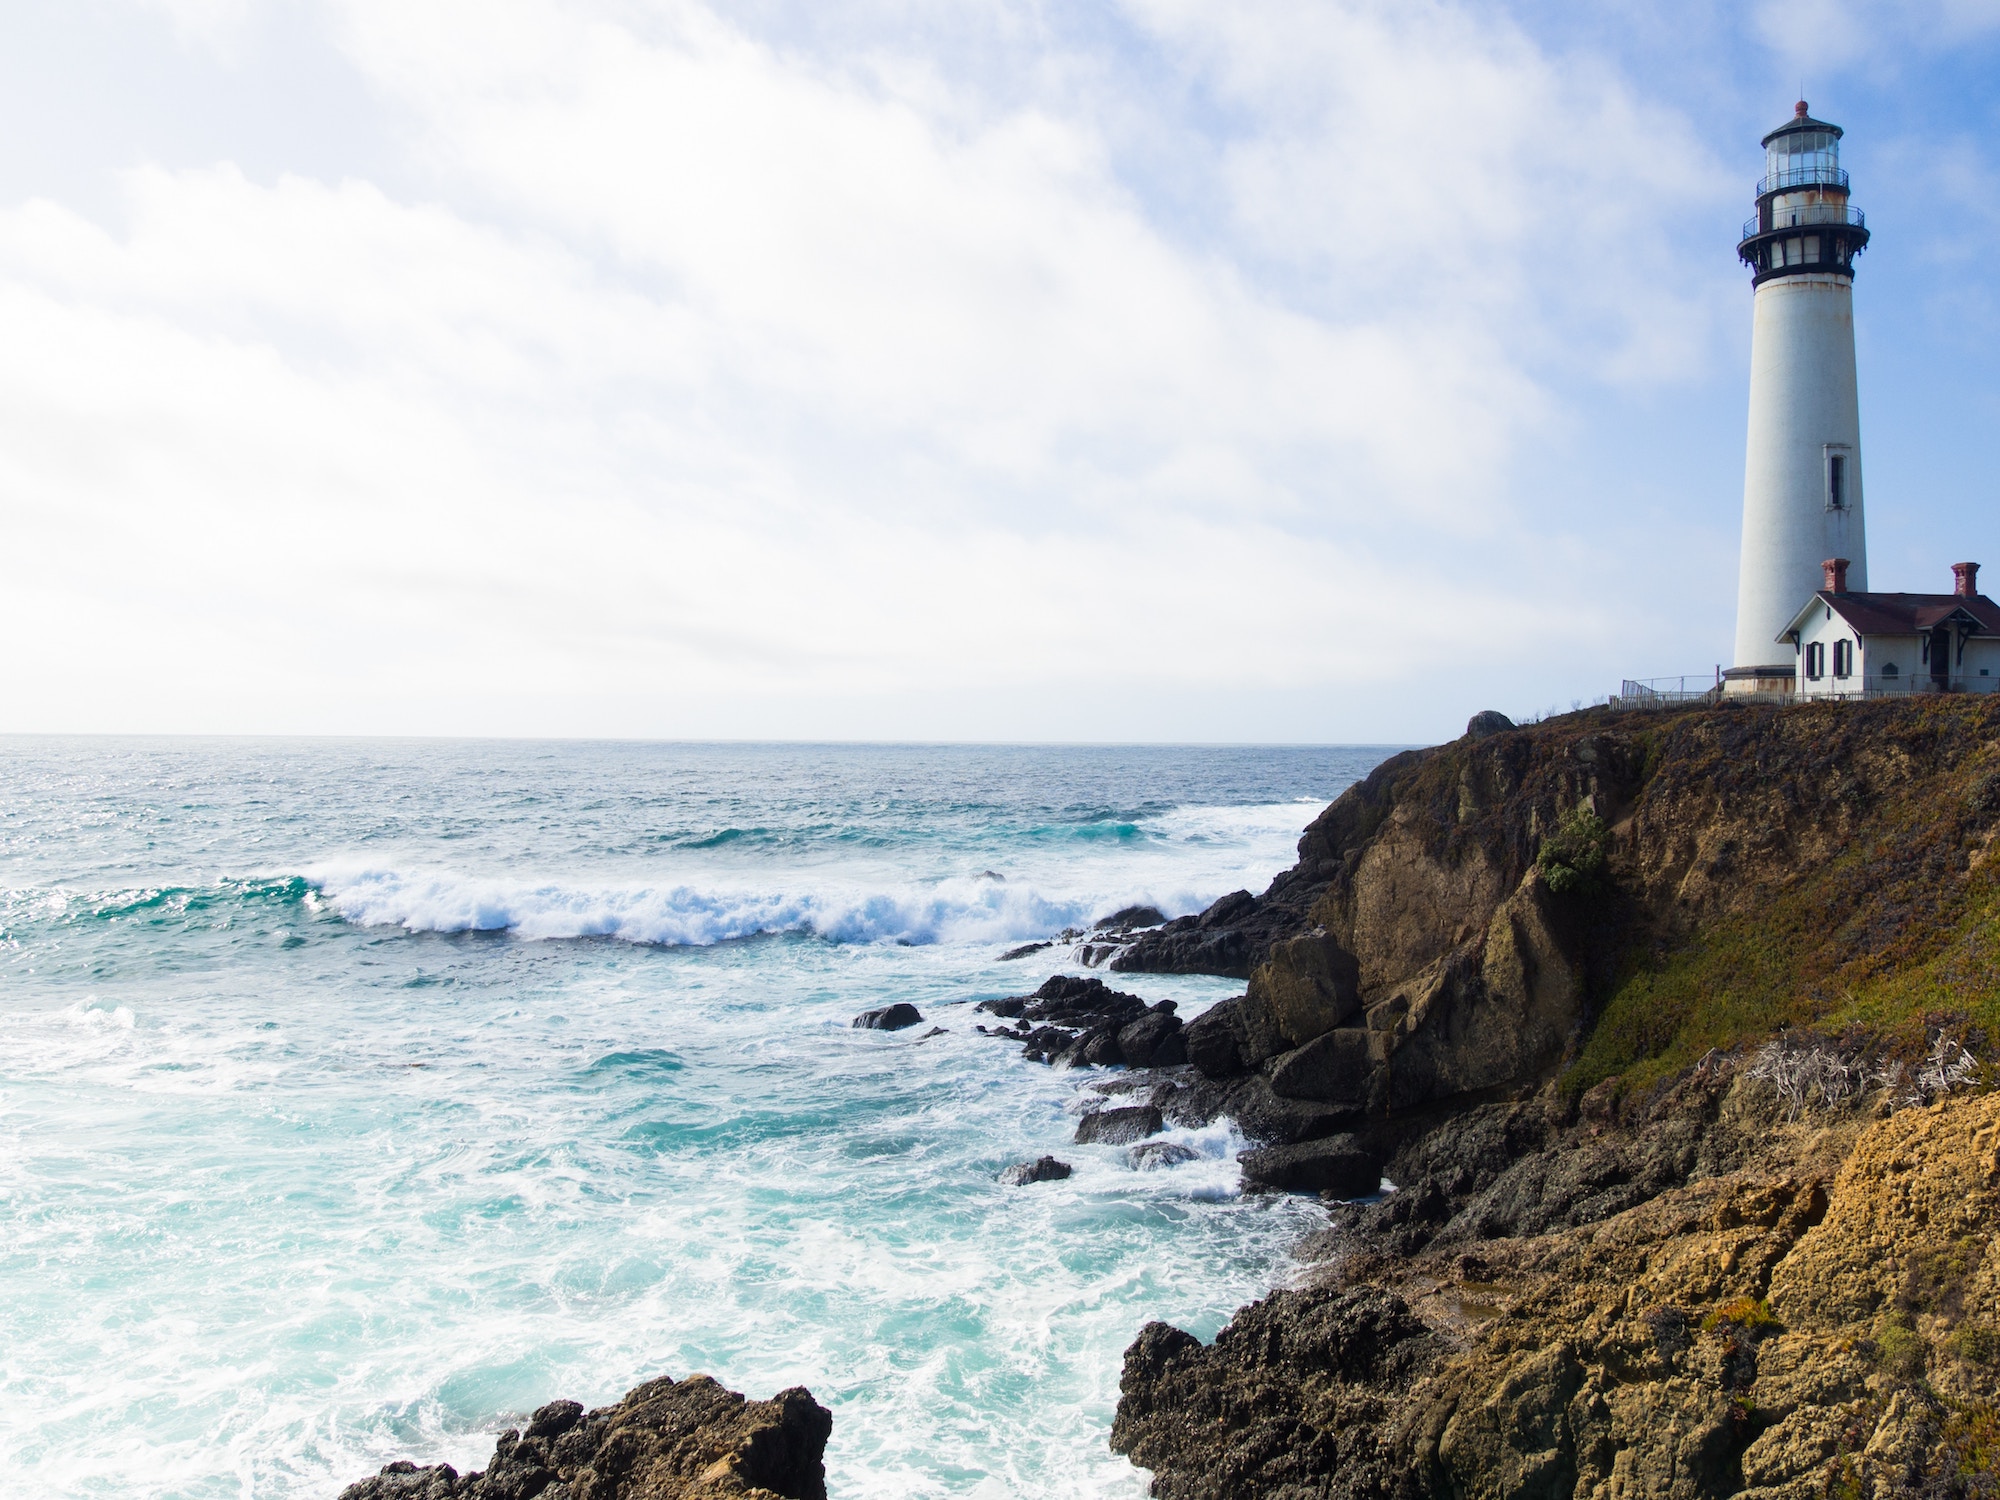 Near Death Experiences are Like Lighthouses Along Life's Troubled Path